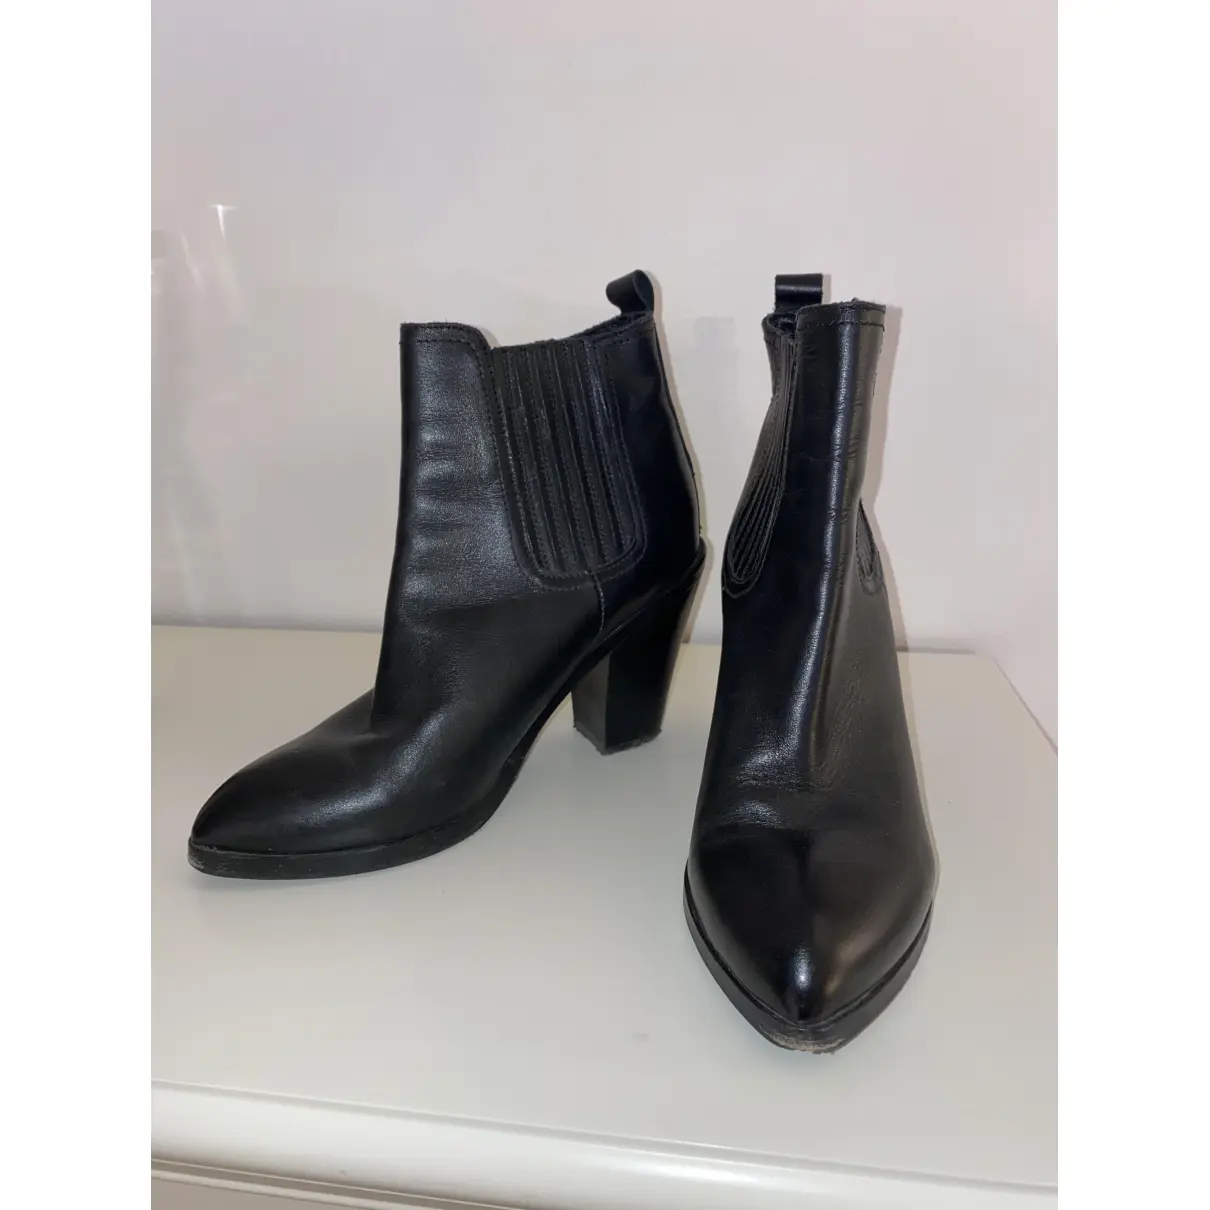 Buy J.Lindeberg Leather ankle boots online